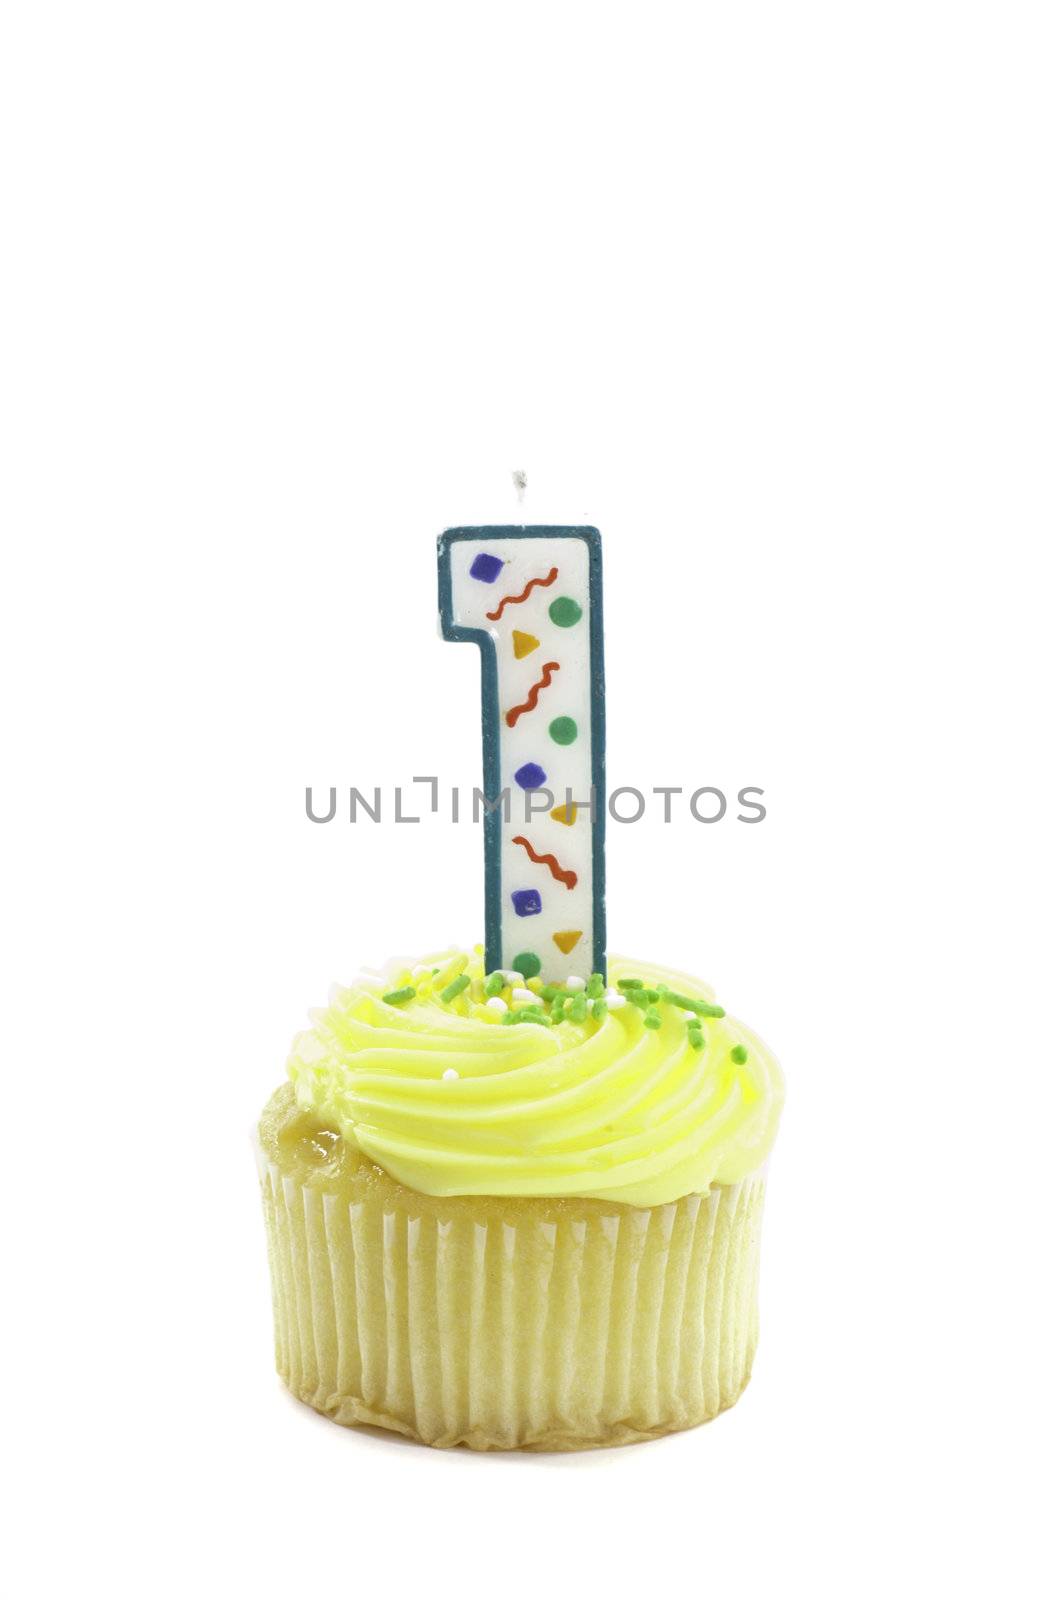 cupcake with numbered candle by jeffbanke